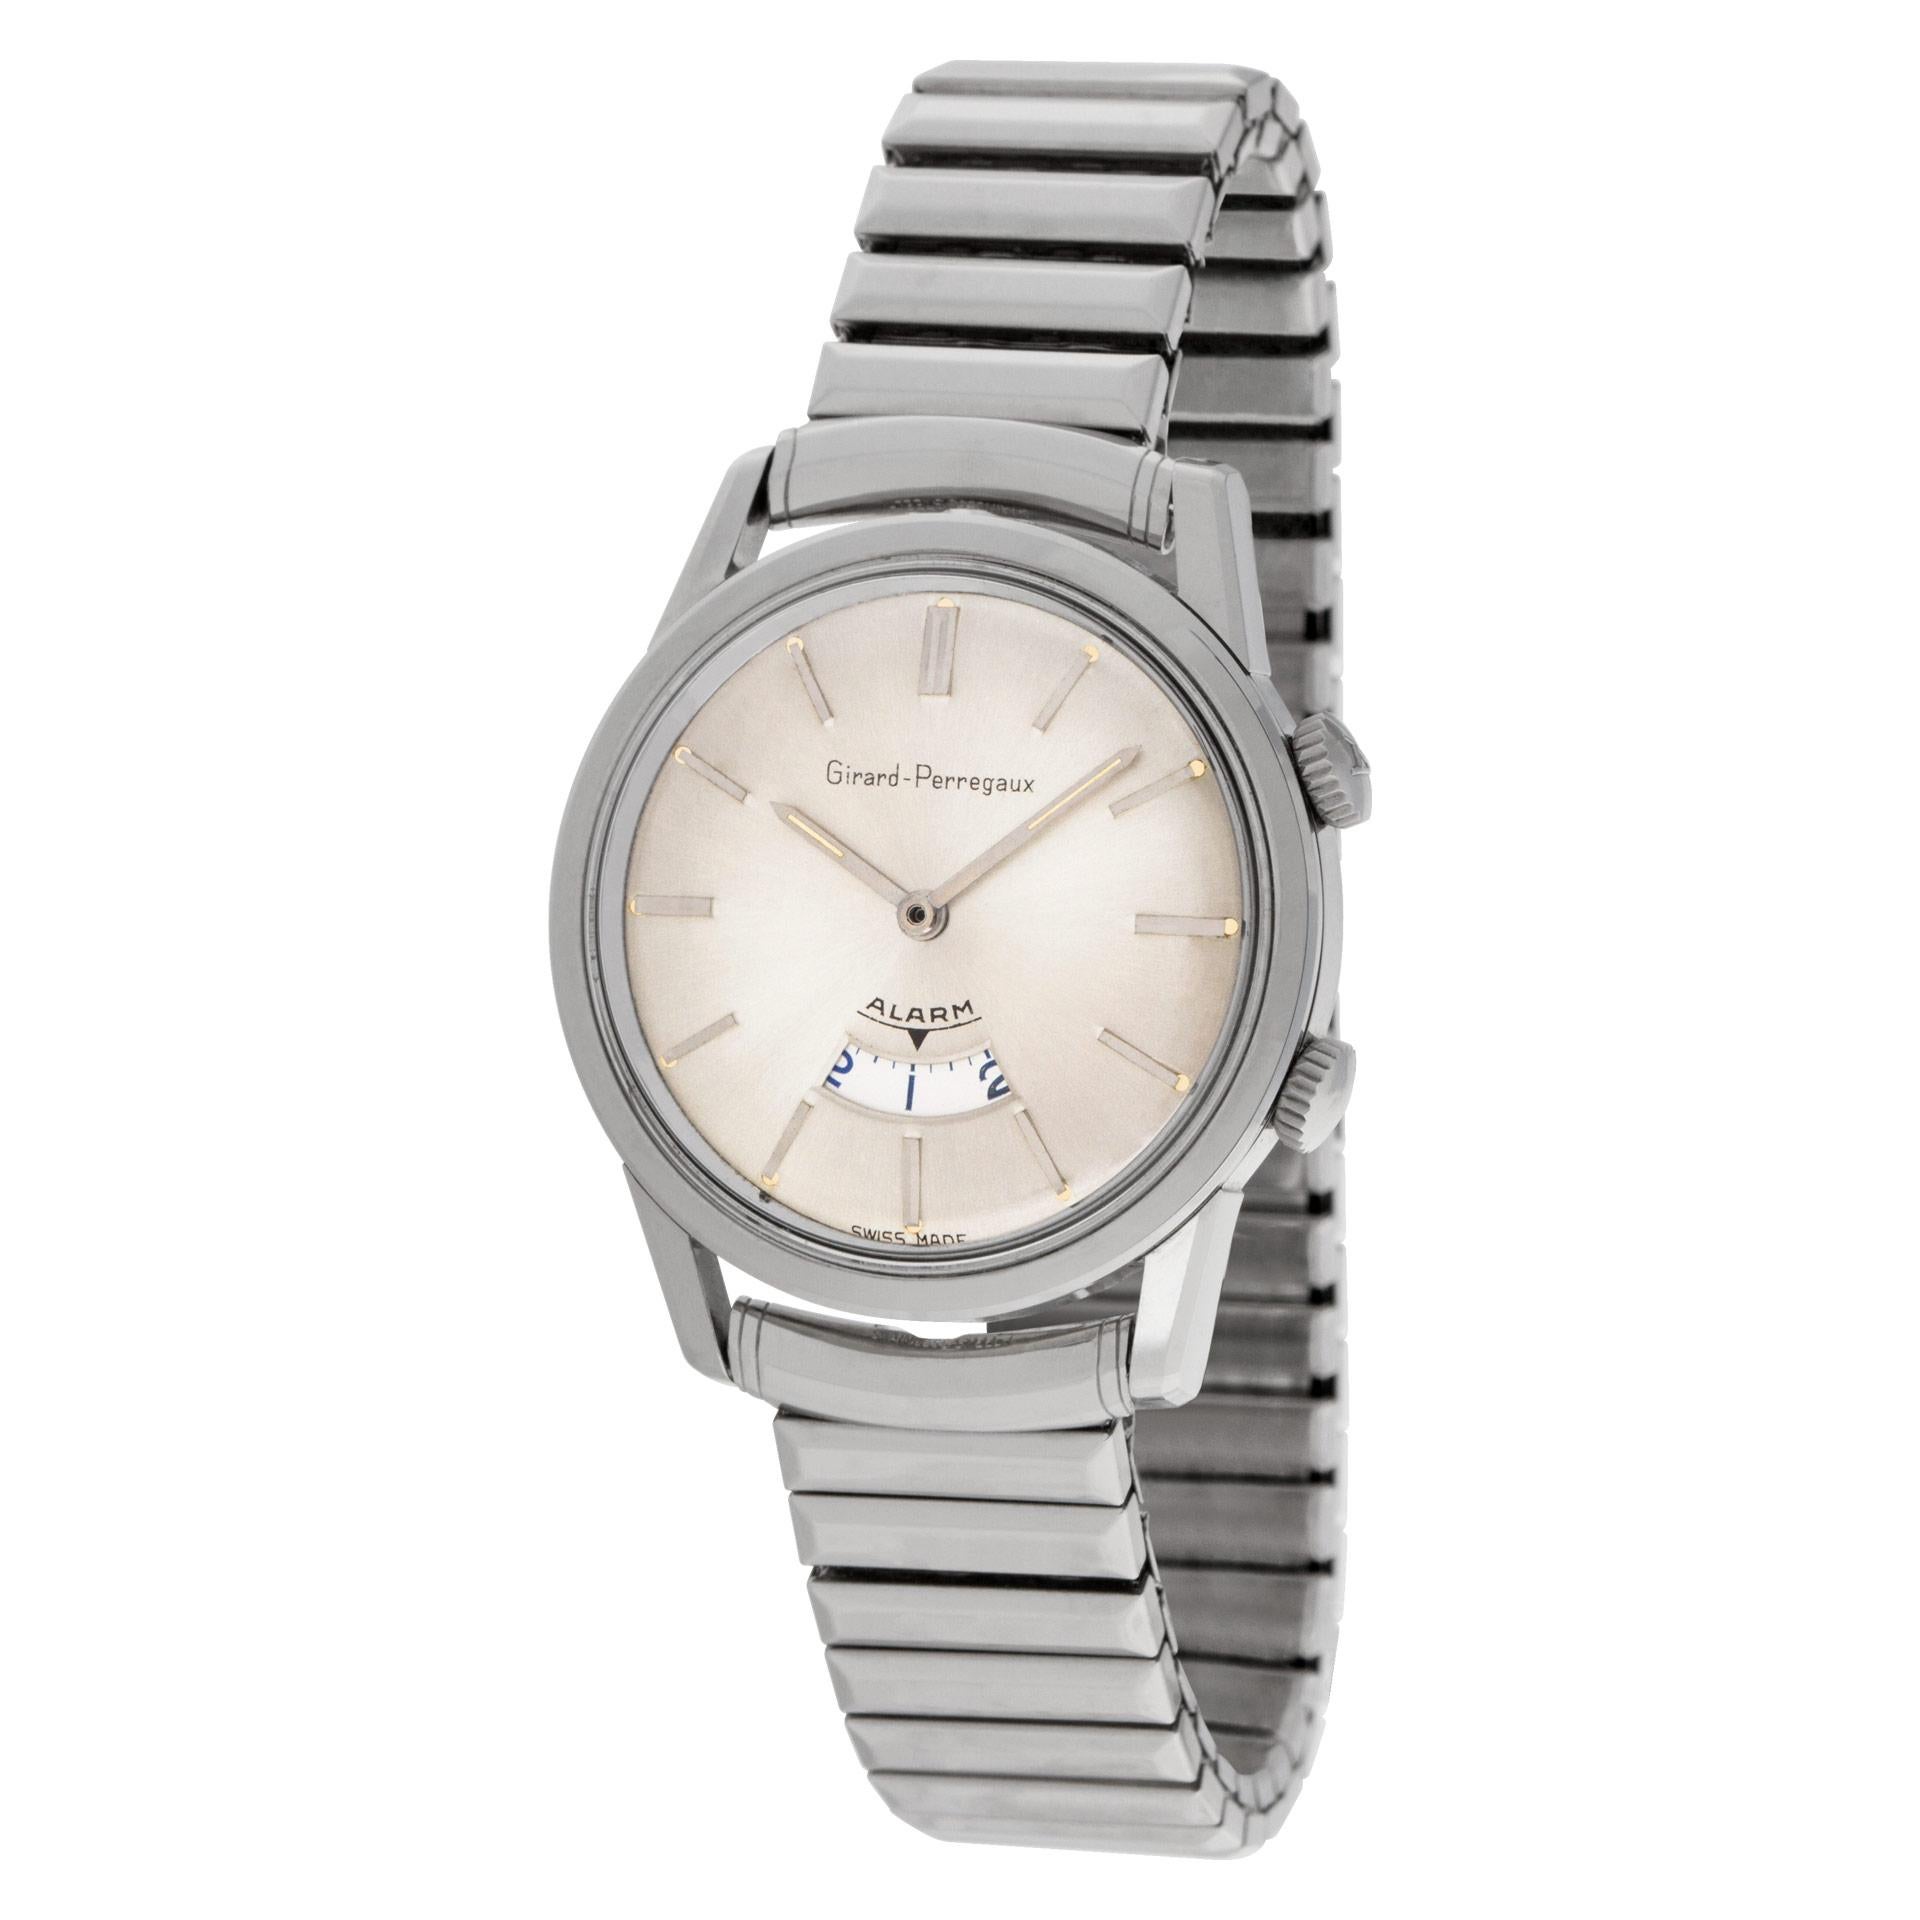 Vintage Girard-Perregaux Alarm wristwatch in stainless steel on bracelet. With two winding crowns. Manual w/ alarm. 35 mm case size. Circa 1960s. Fine Pre-owned Girard Perregaux Watch.

Certified preowned Vintage Girard Perregaux Alarm 1475 watch is